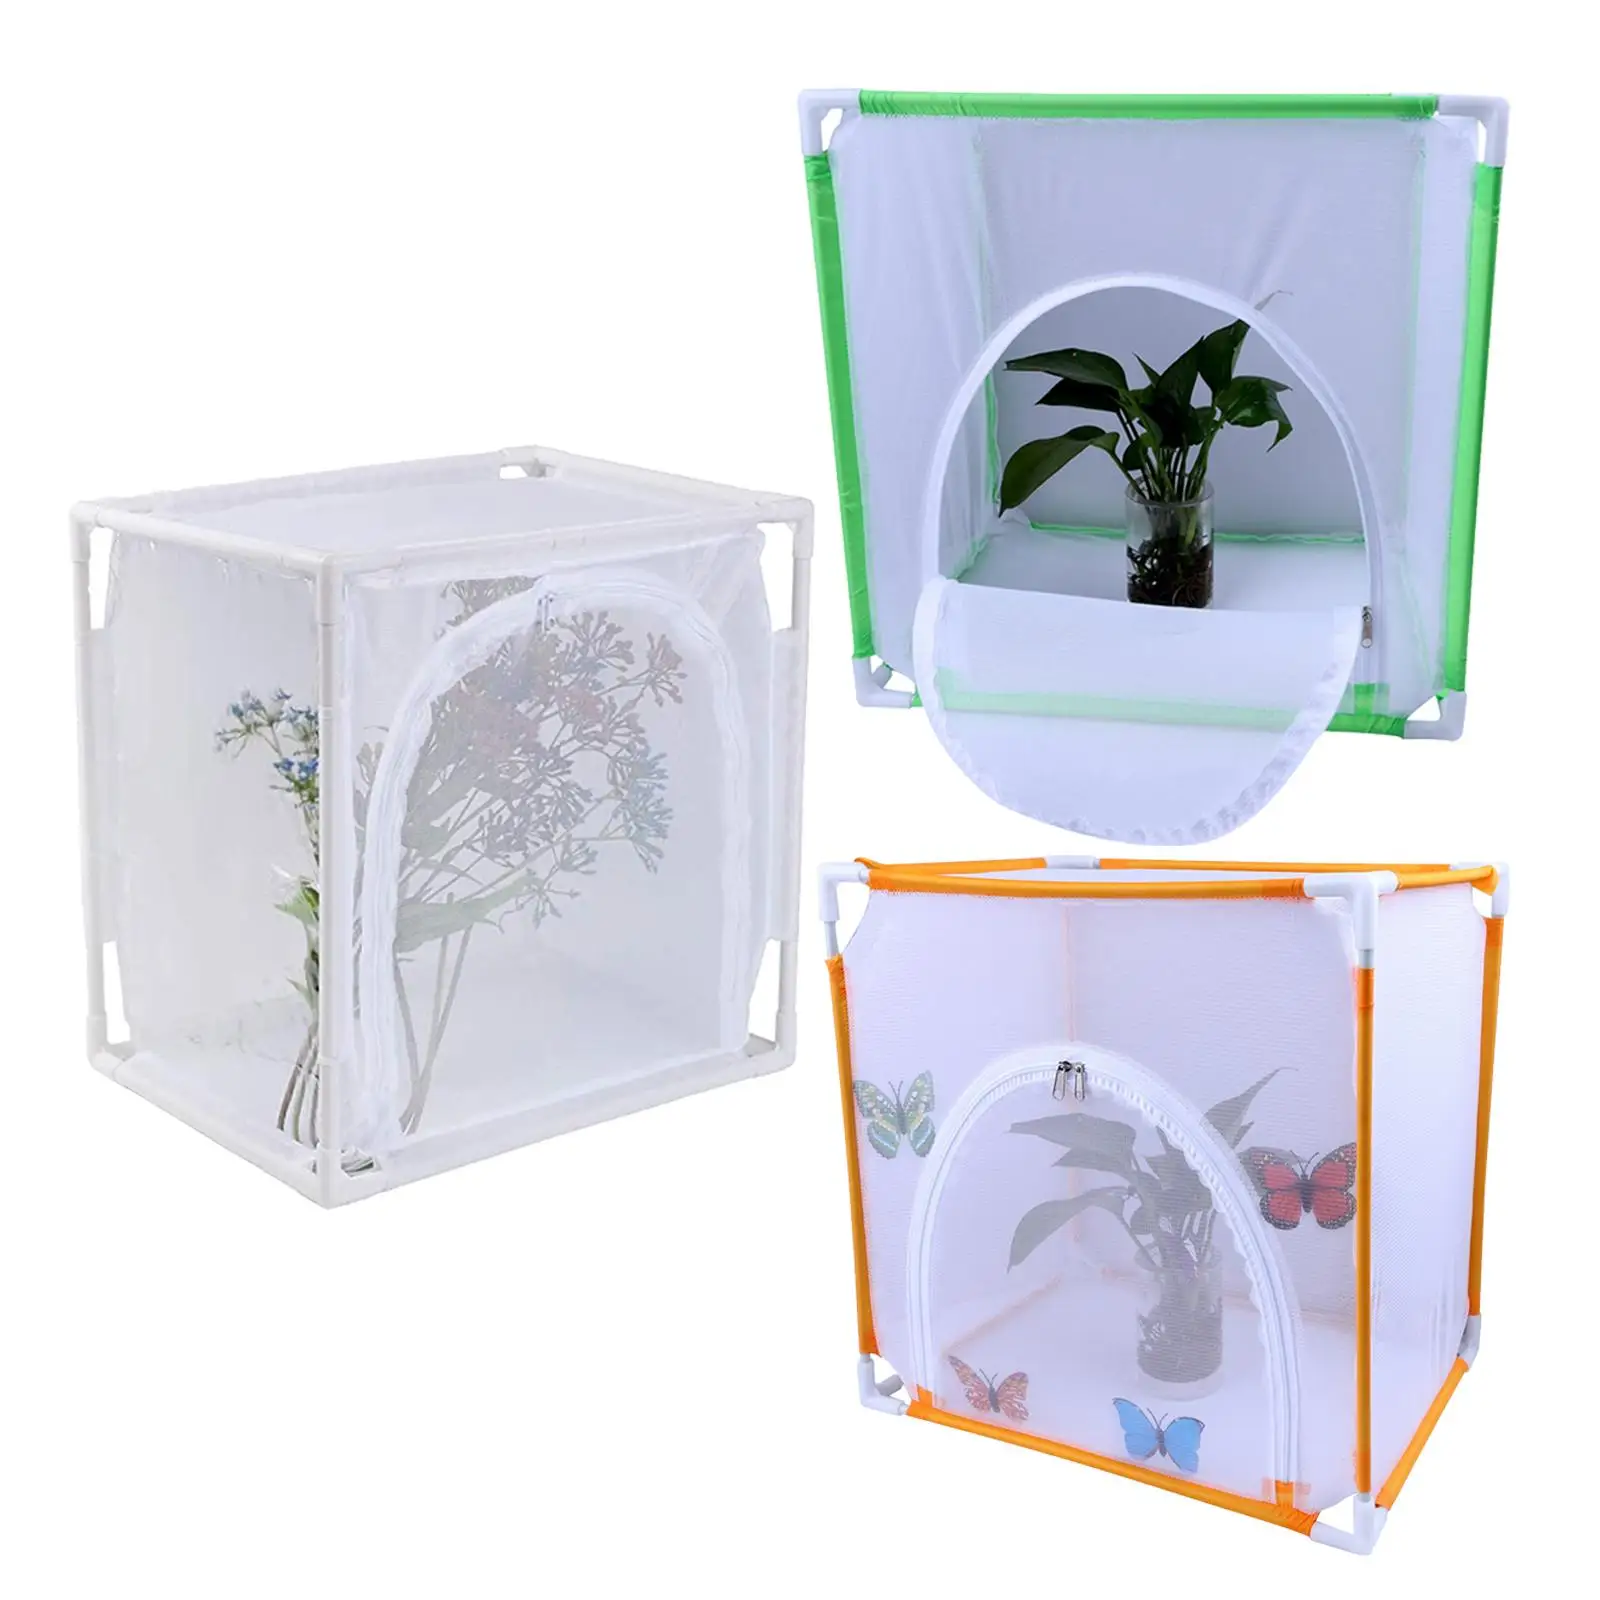 Monarch Butterfly Habitat Insect Mesh Cage Dragonfly Butterfly Flying Insect Terrarium for Caterpillars Butterfly Observation